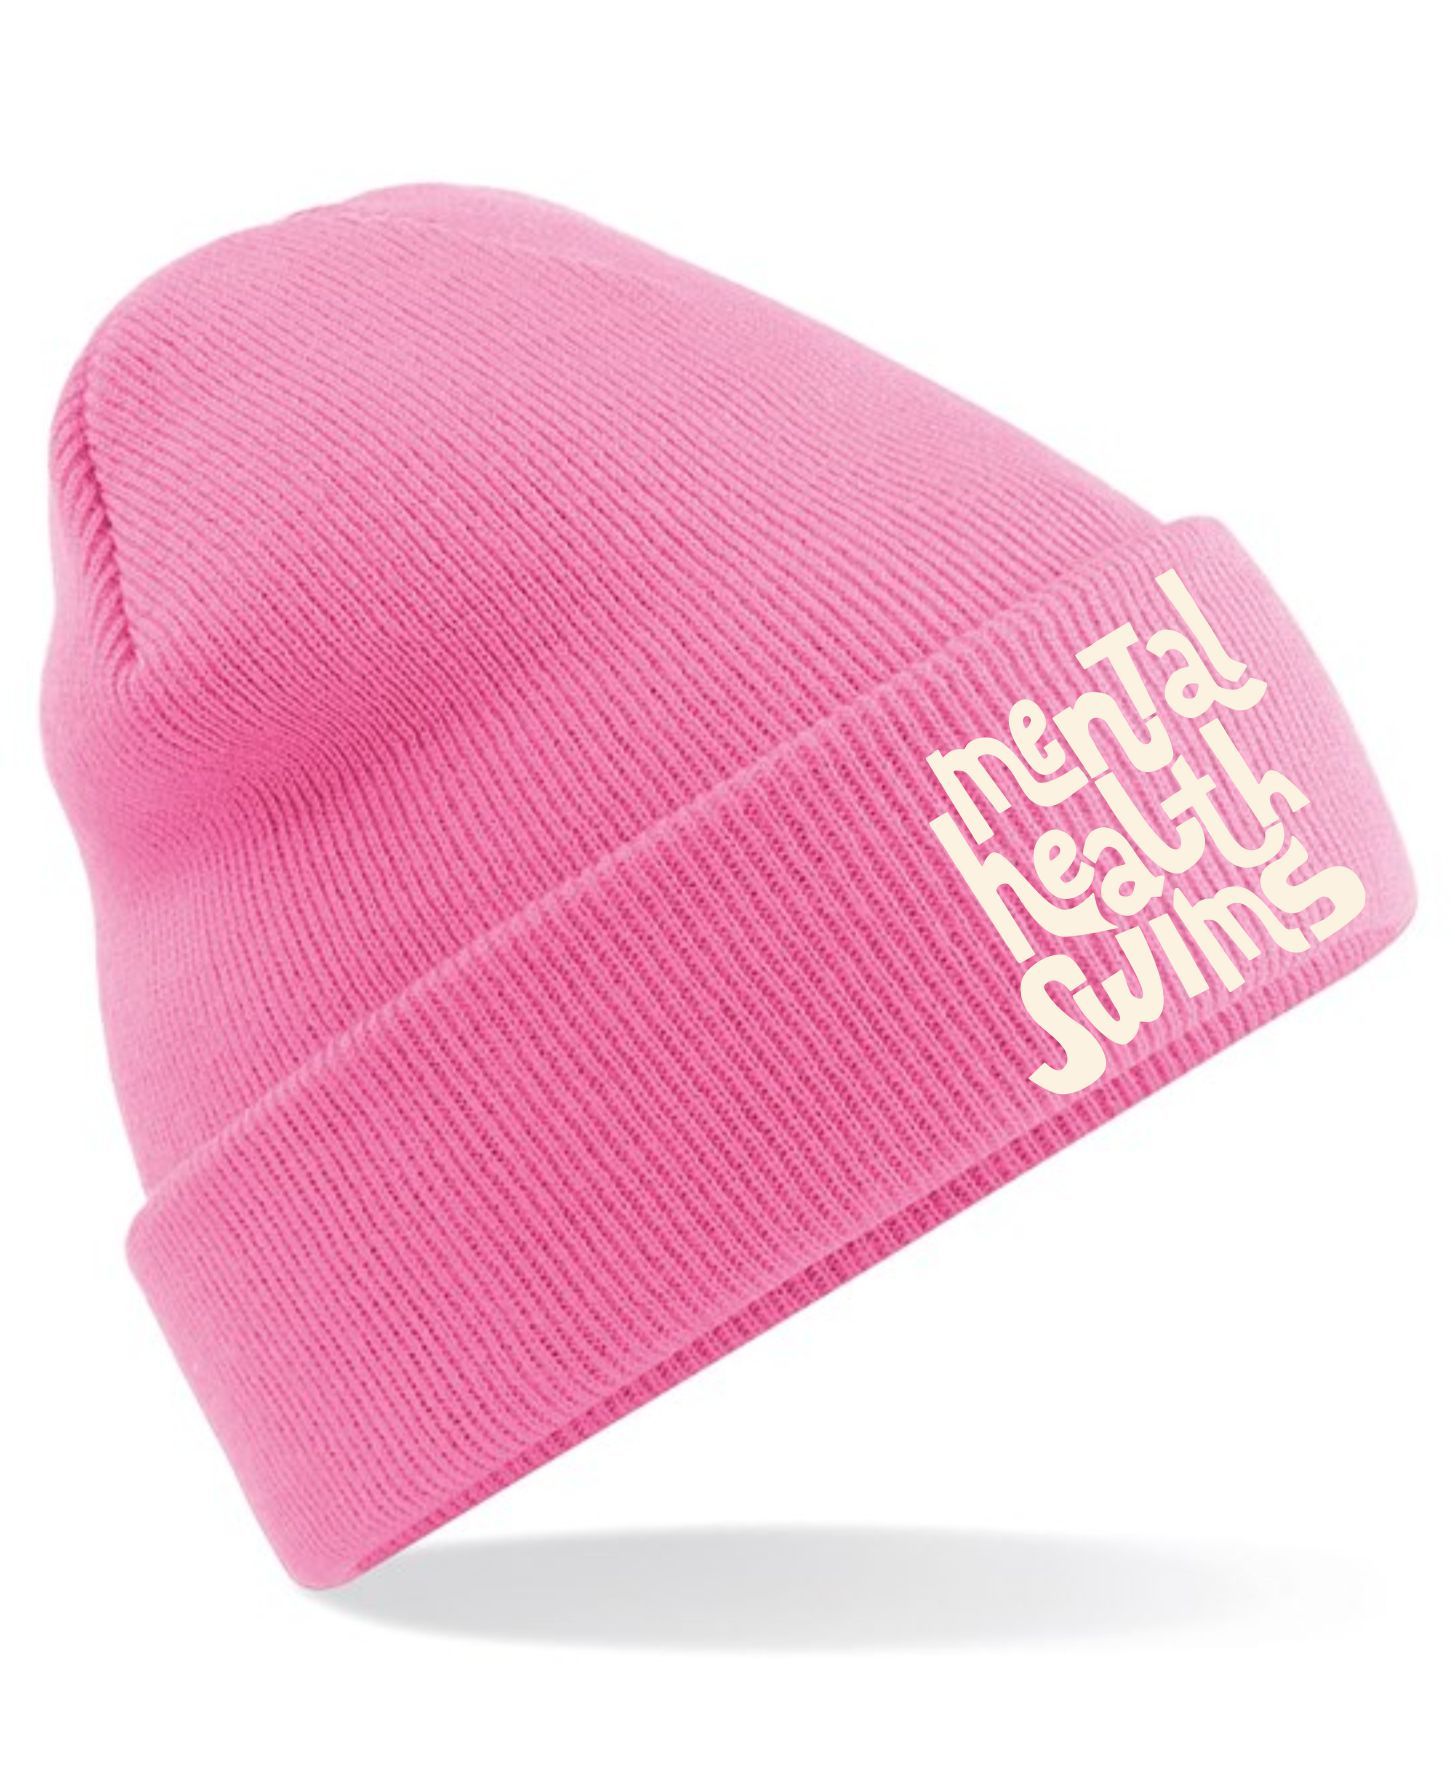 Mental Health Swims- 'Text only' Classic Pink Beanie